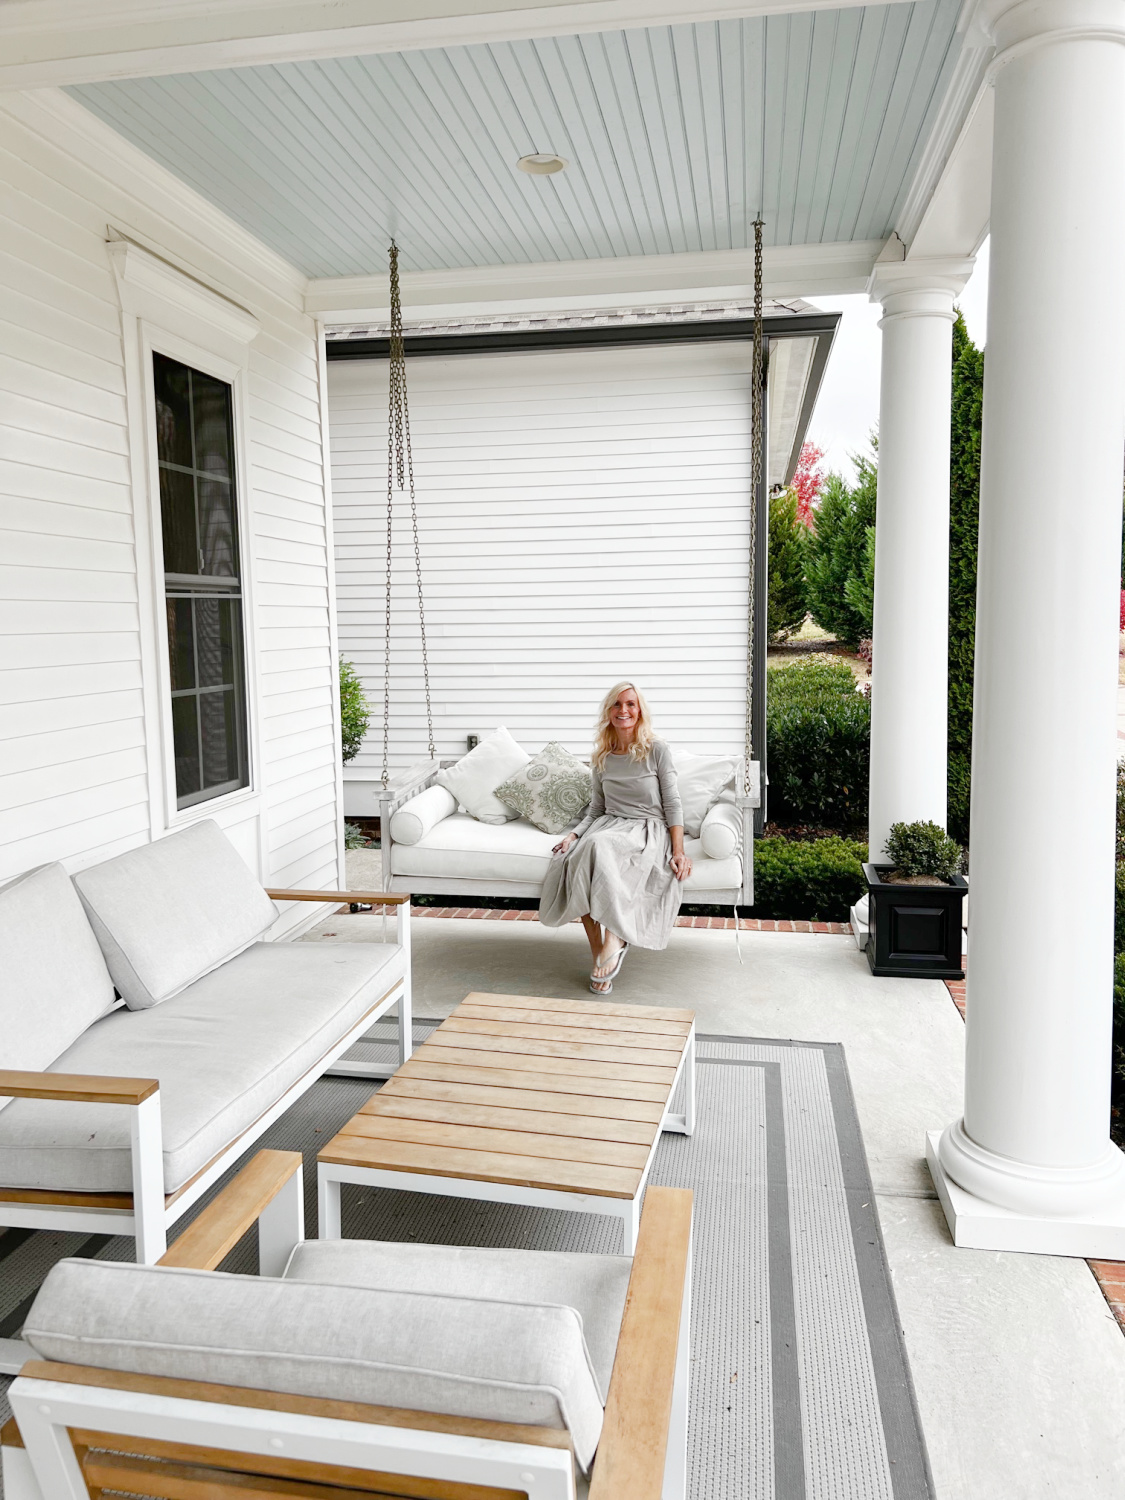 Michele on a Southern porch swing in Franklin, TN - Hello Lovely Studio.